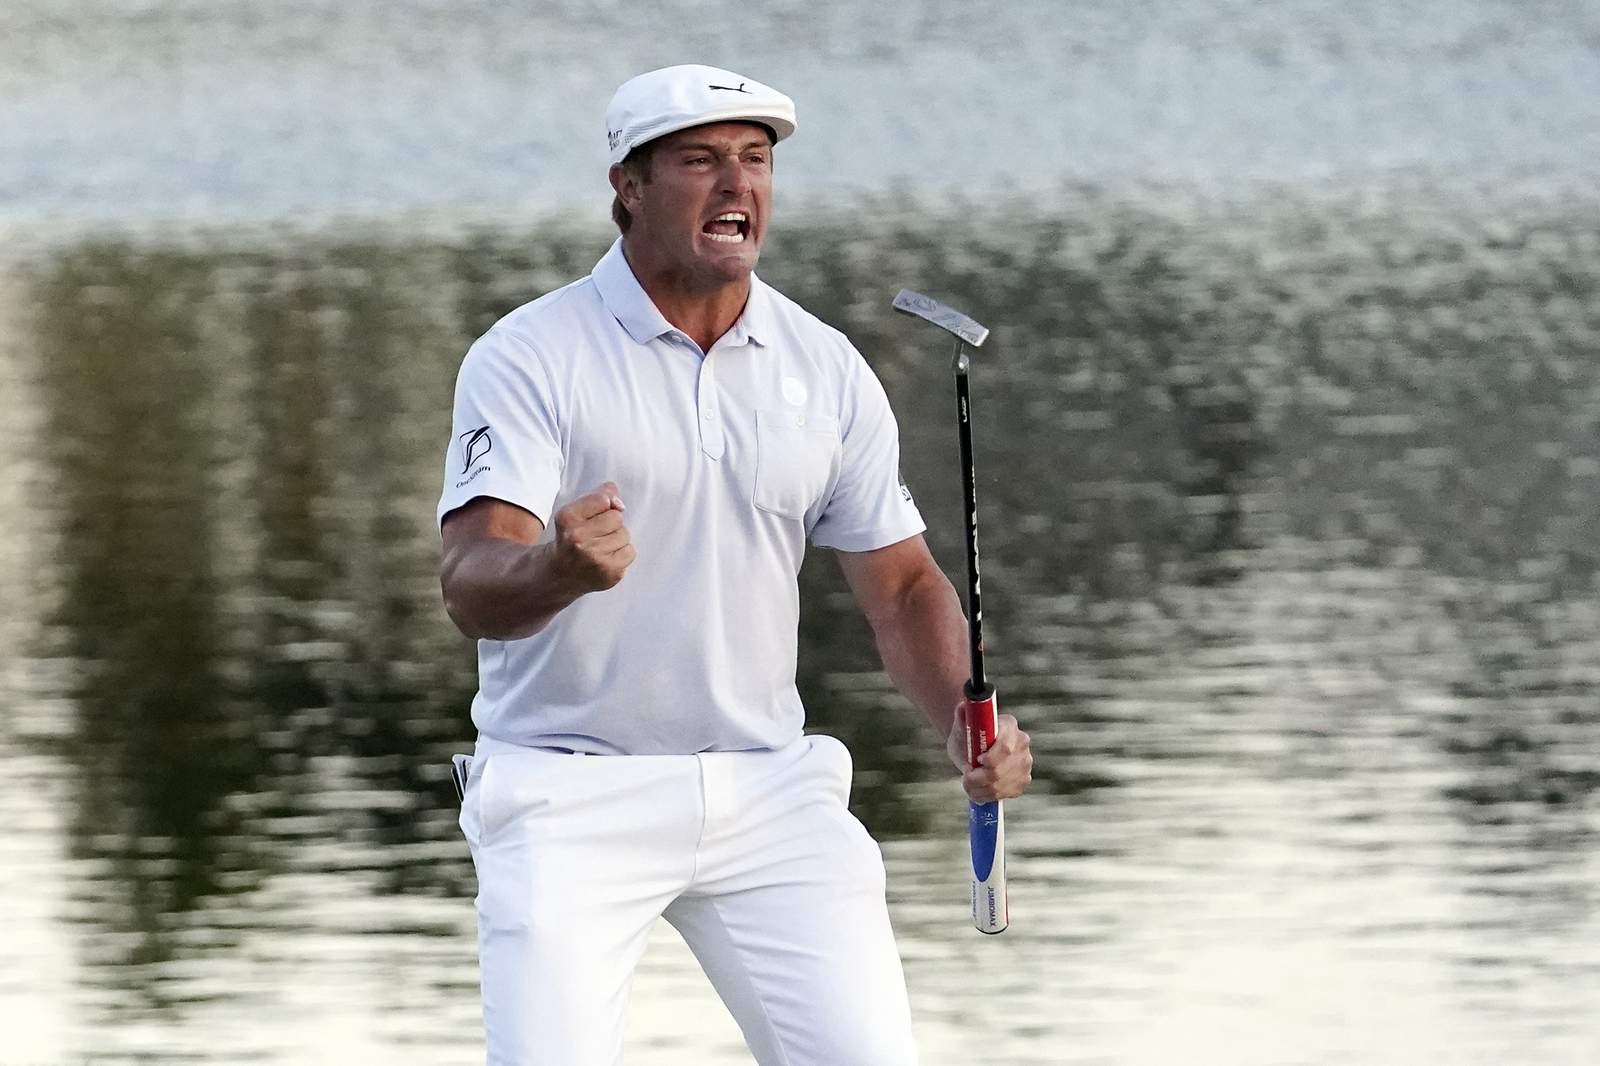 DeChambeau makes big putts to outlast Westwood at Bay Hill